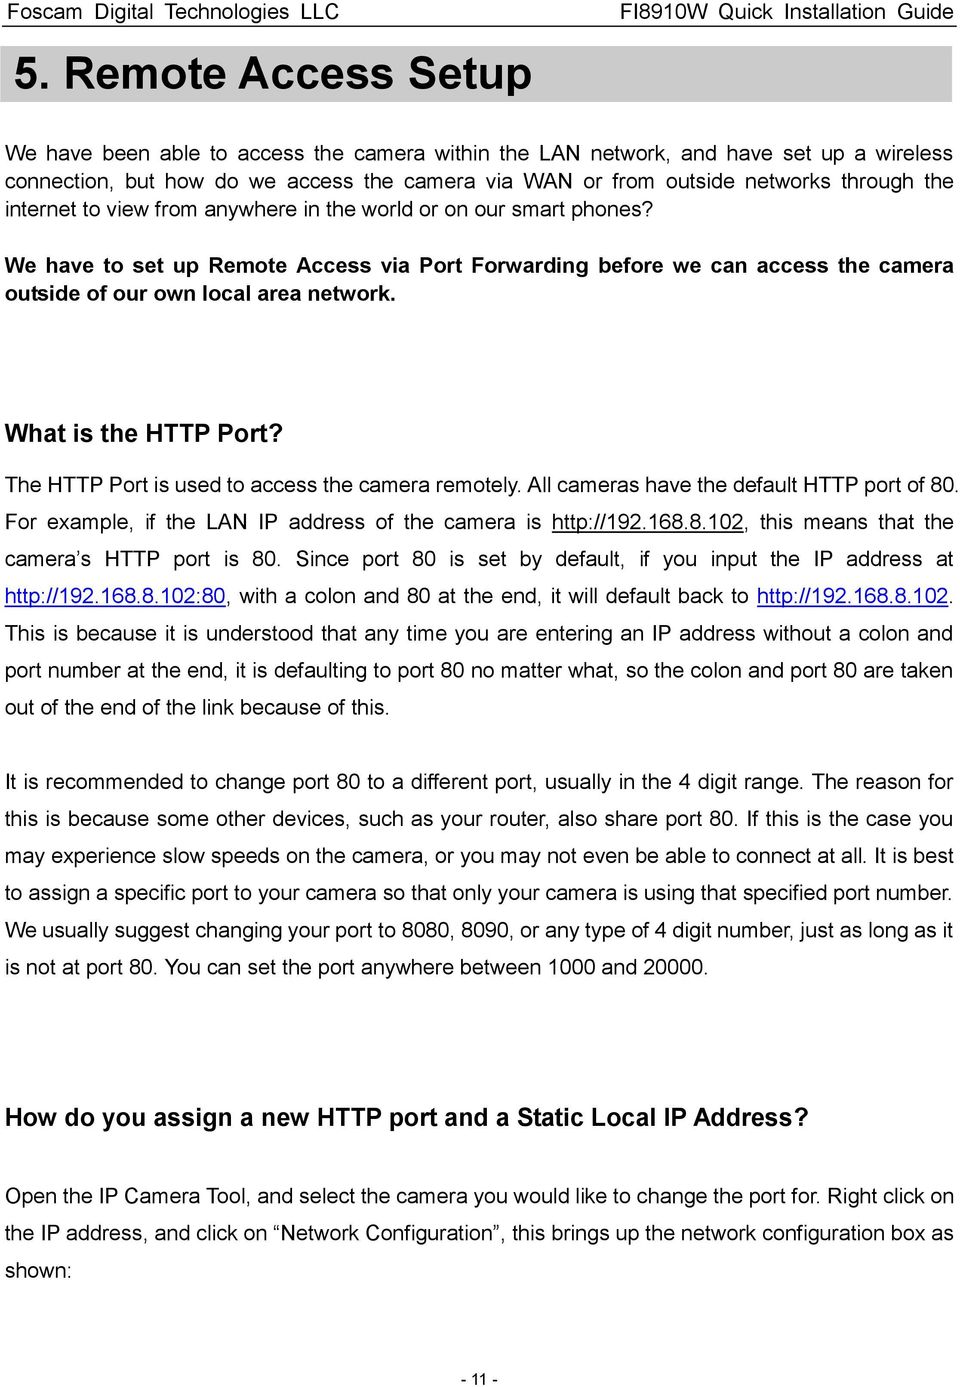 What is the HTTP Port? The HTTP Port is used to access the camera remotely. All cameras have the default HTTP port of 80. For example, if the LAN IP address of the camera is http://192.168.8.102, this means that the camera s HTTP port is 80.